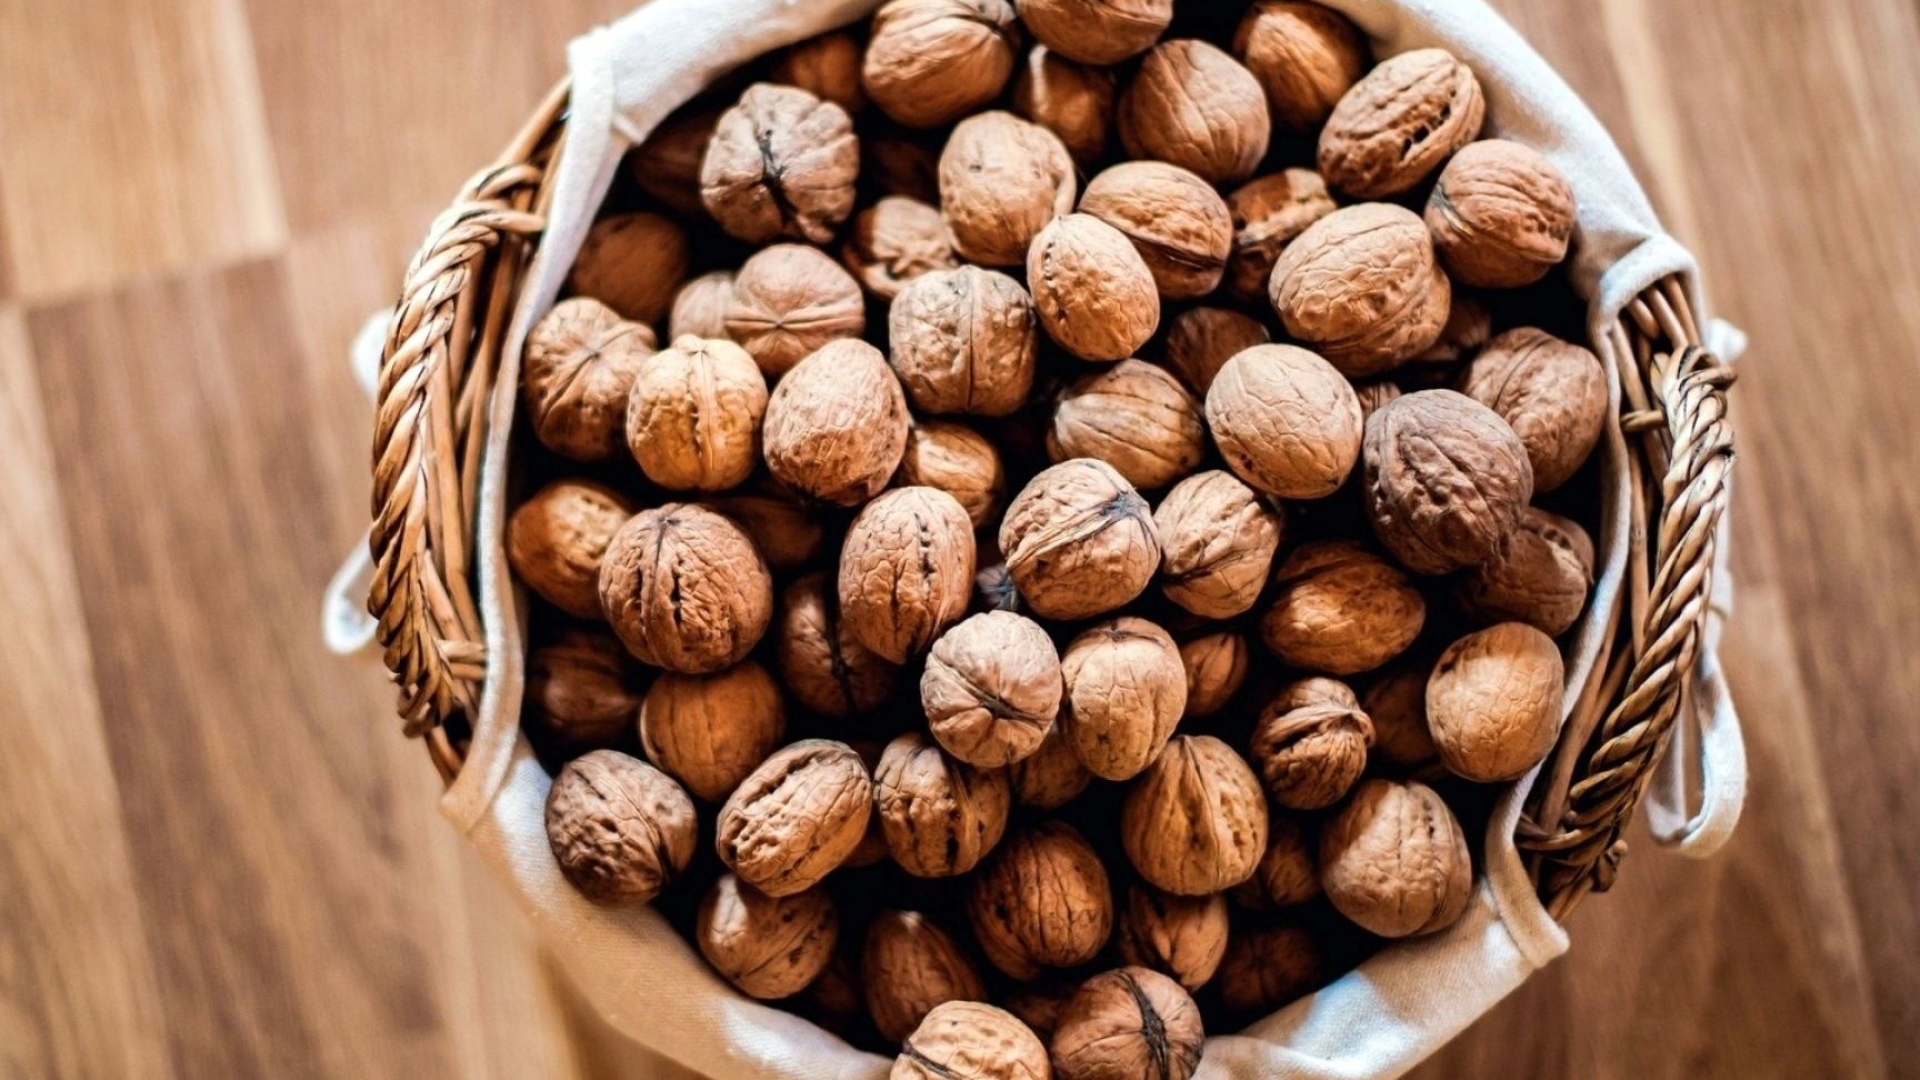 Nuts: A wrinkly, globe-like nut that is the fruit of the walnut tree. 1920x1080 Full HD Background.